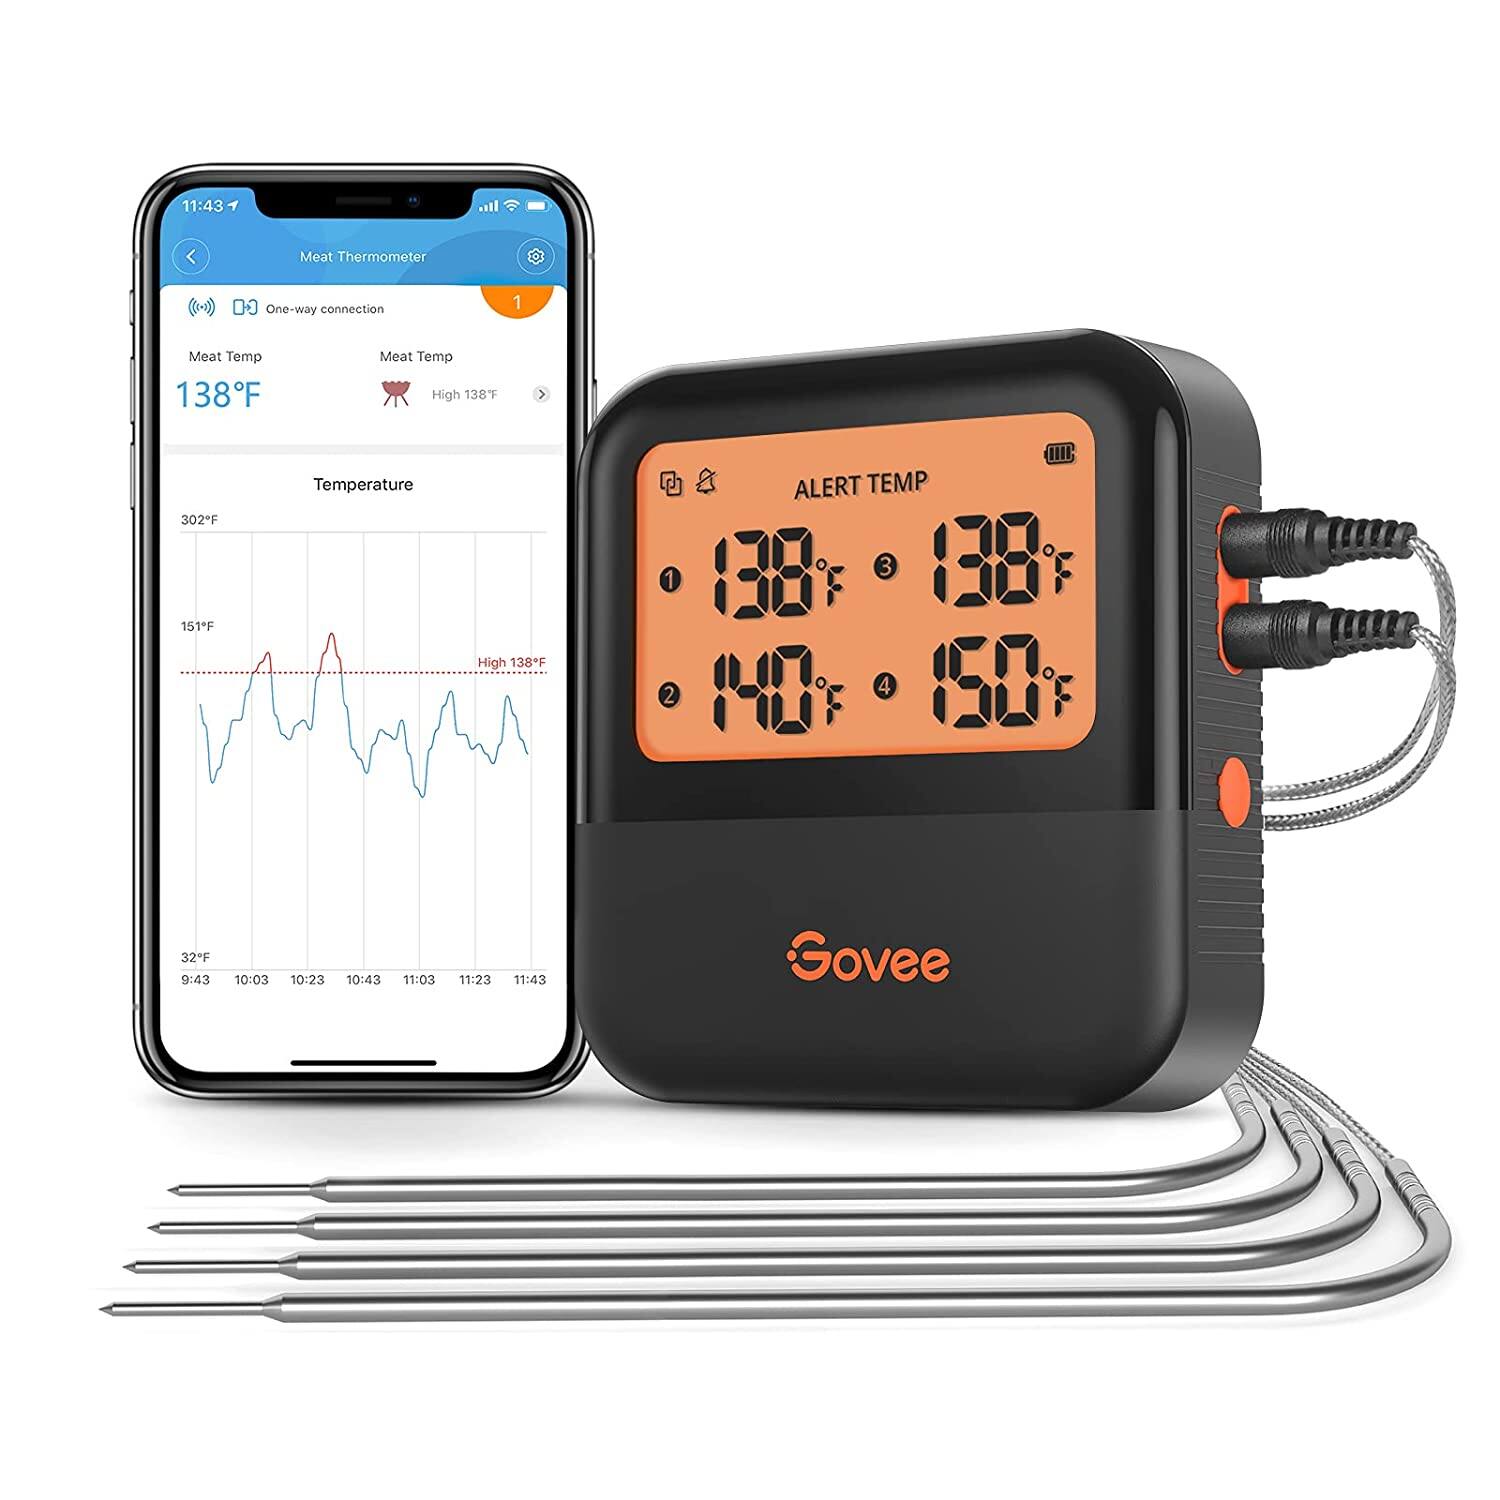 Govee Bluetooth Meat Thermometer with 4 Probes, Backlight Screen, 230ft Remote Temperature Monitoring, Smart Alert Notification for $23.99 + FS